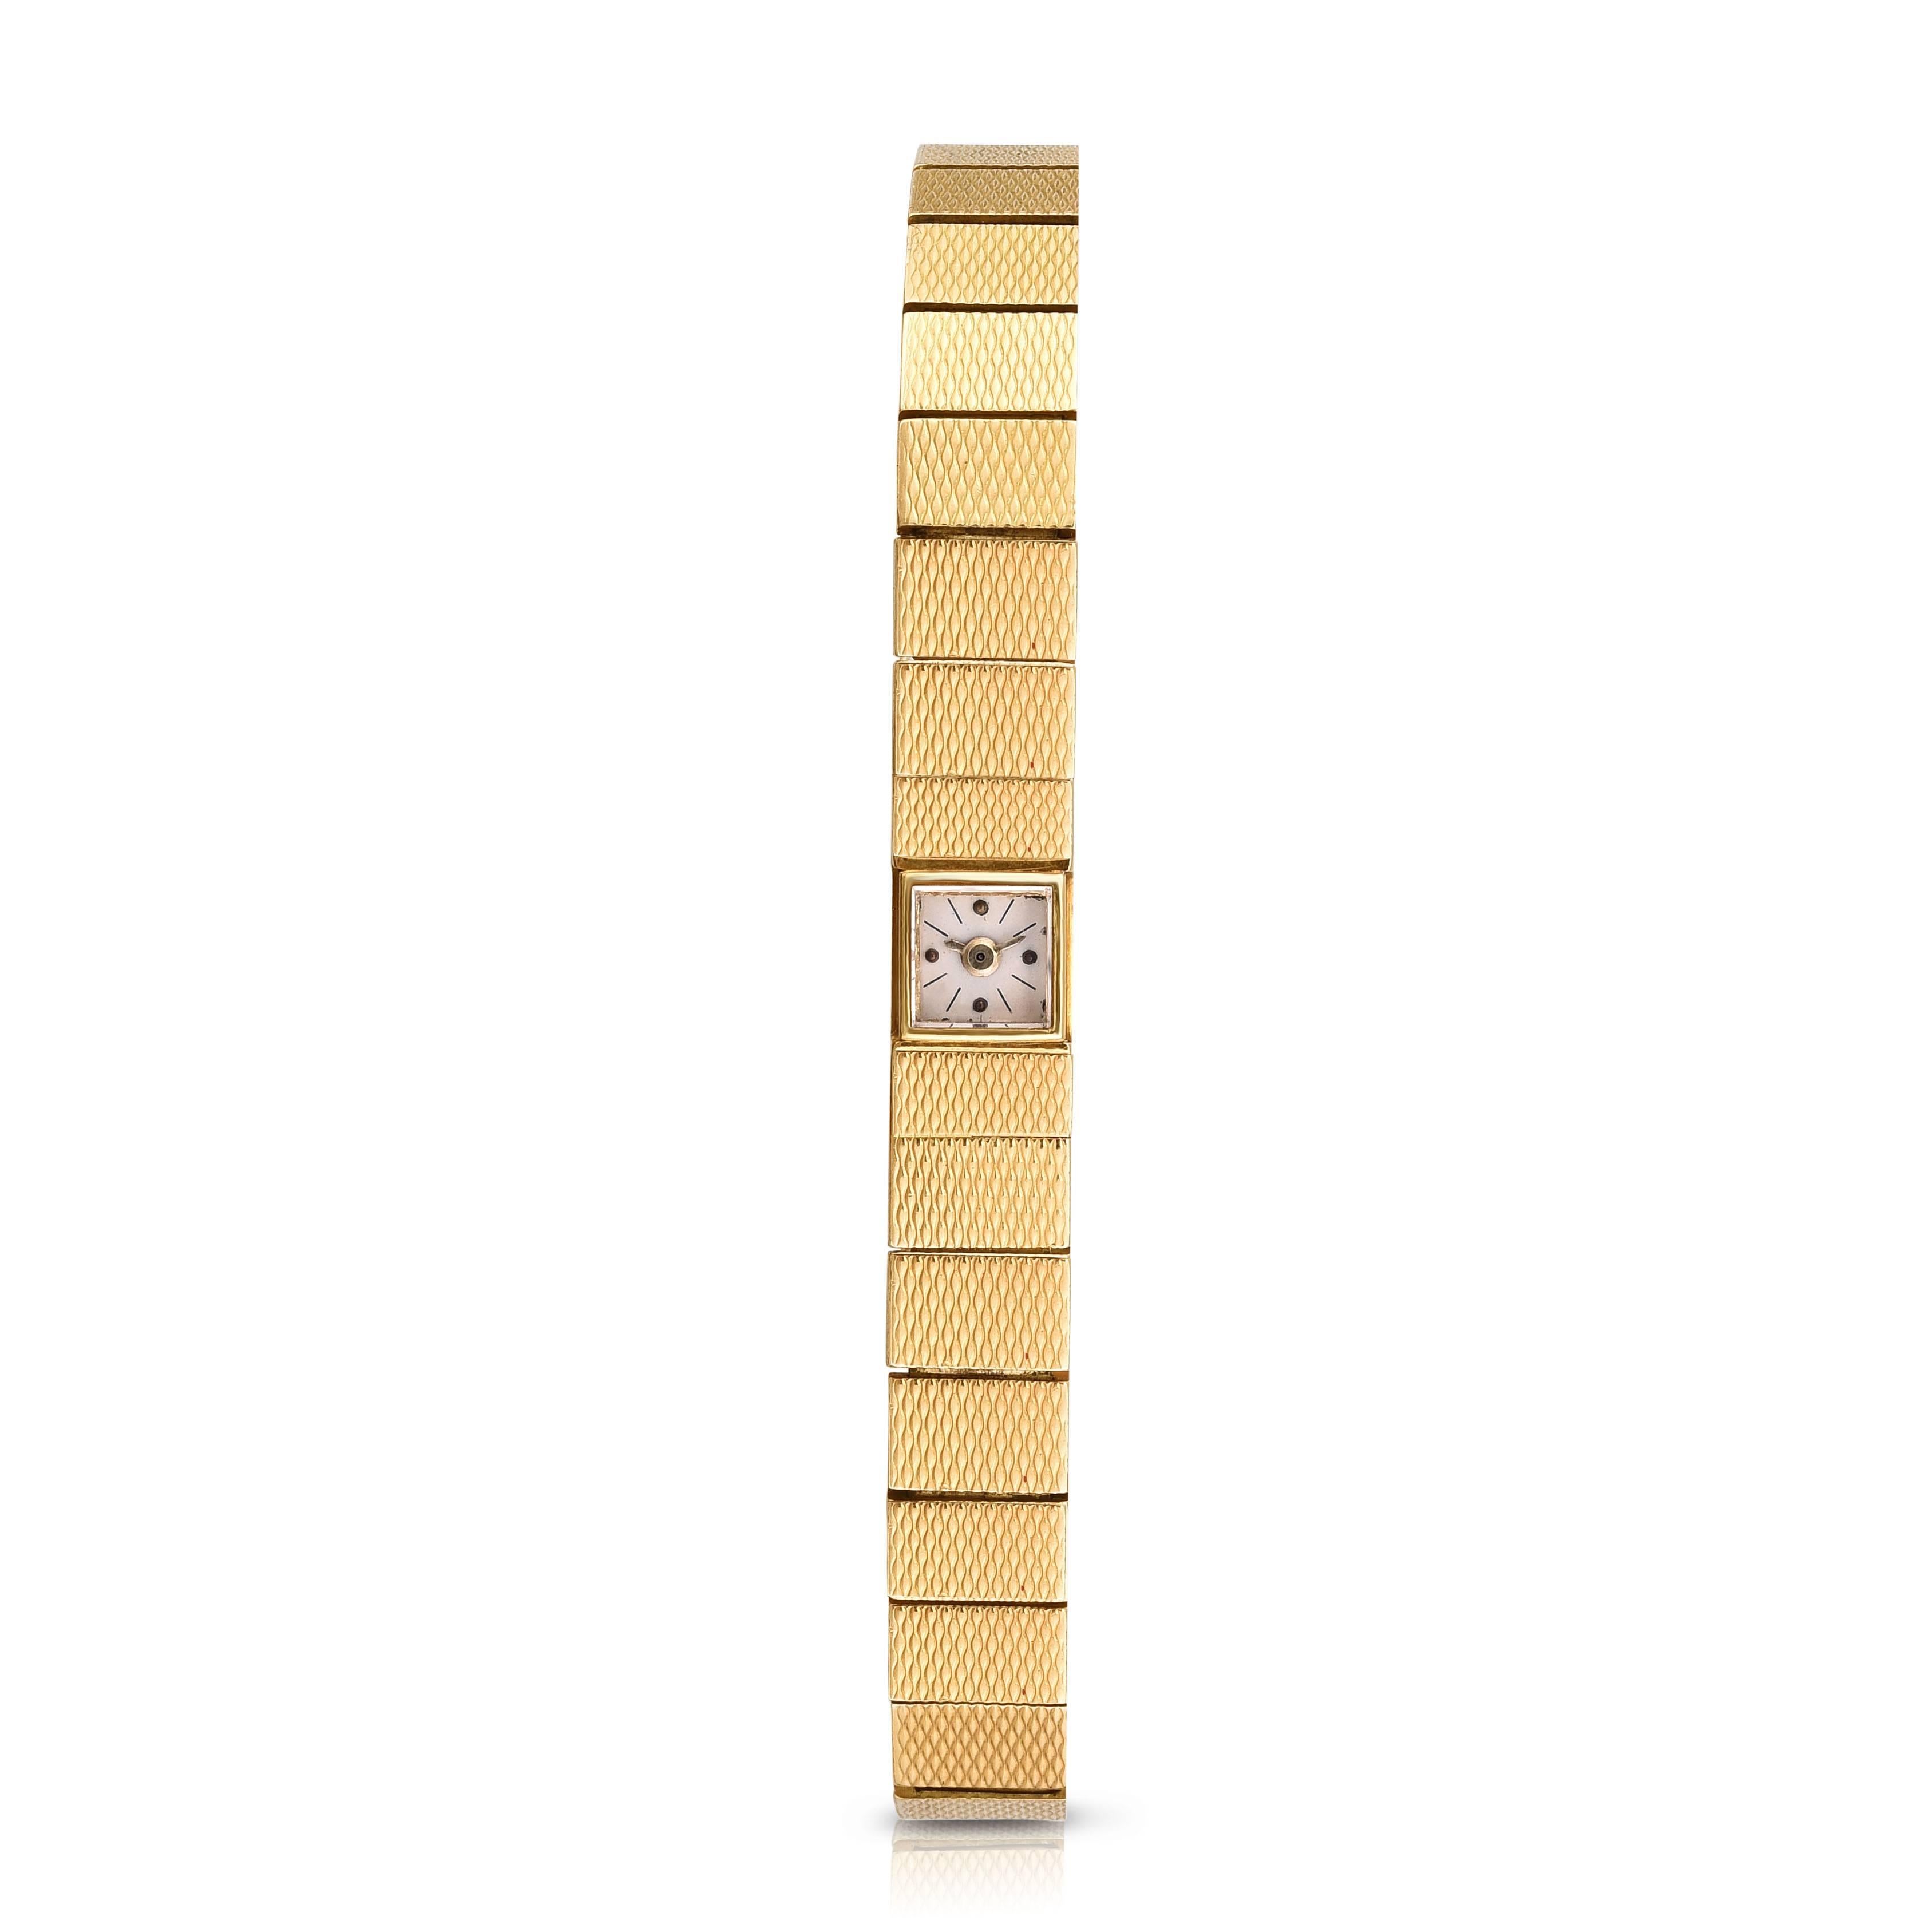 Vintage Vacheron Constantin 18K Dress Watch
Solid 18K Yellow Gold
Manual Wind Movement
Bangle/Bracelet Style Band
Signed Movement and Caseback
Guaranteed 100% Authentic Movement and Case
Includes Letter of Authenticity and One-Year Warranty on